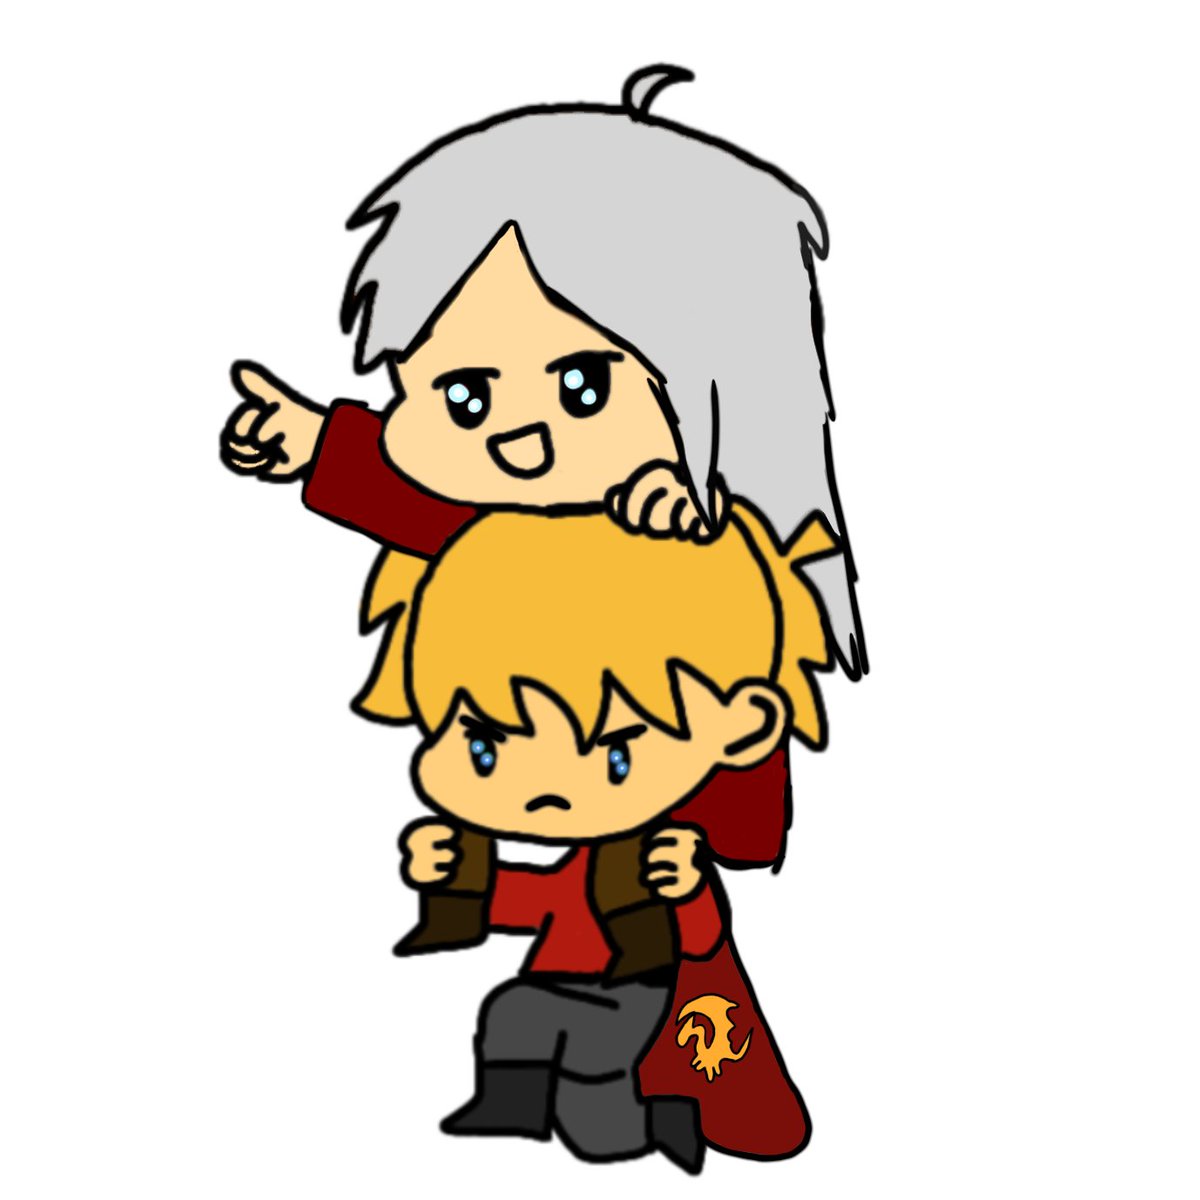 Chibi style Arthur and dragoon for my first tweet :] #bbcmerlin #Merlin #art